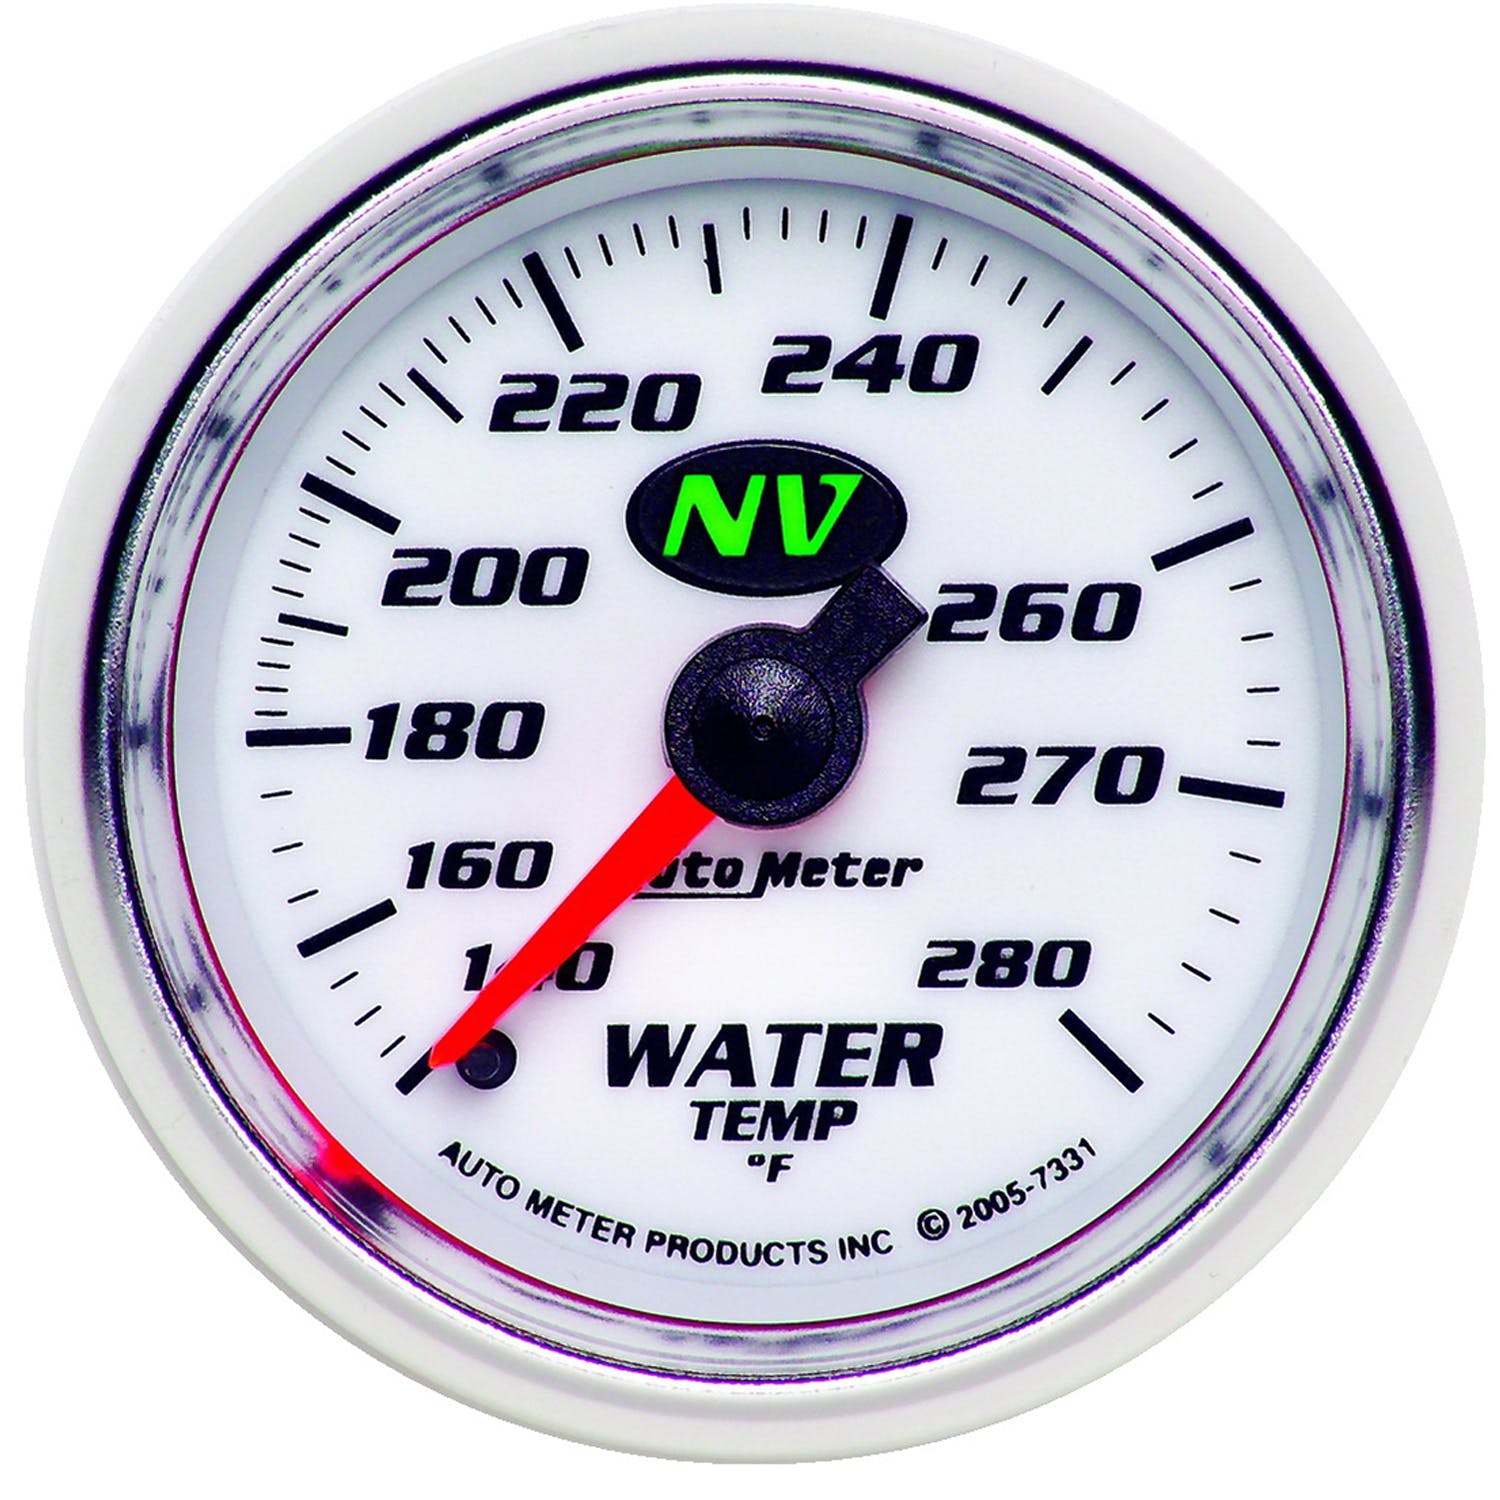 AutoMeter Products 7331 Water Temp 140-280 F